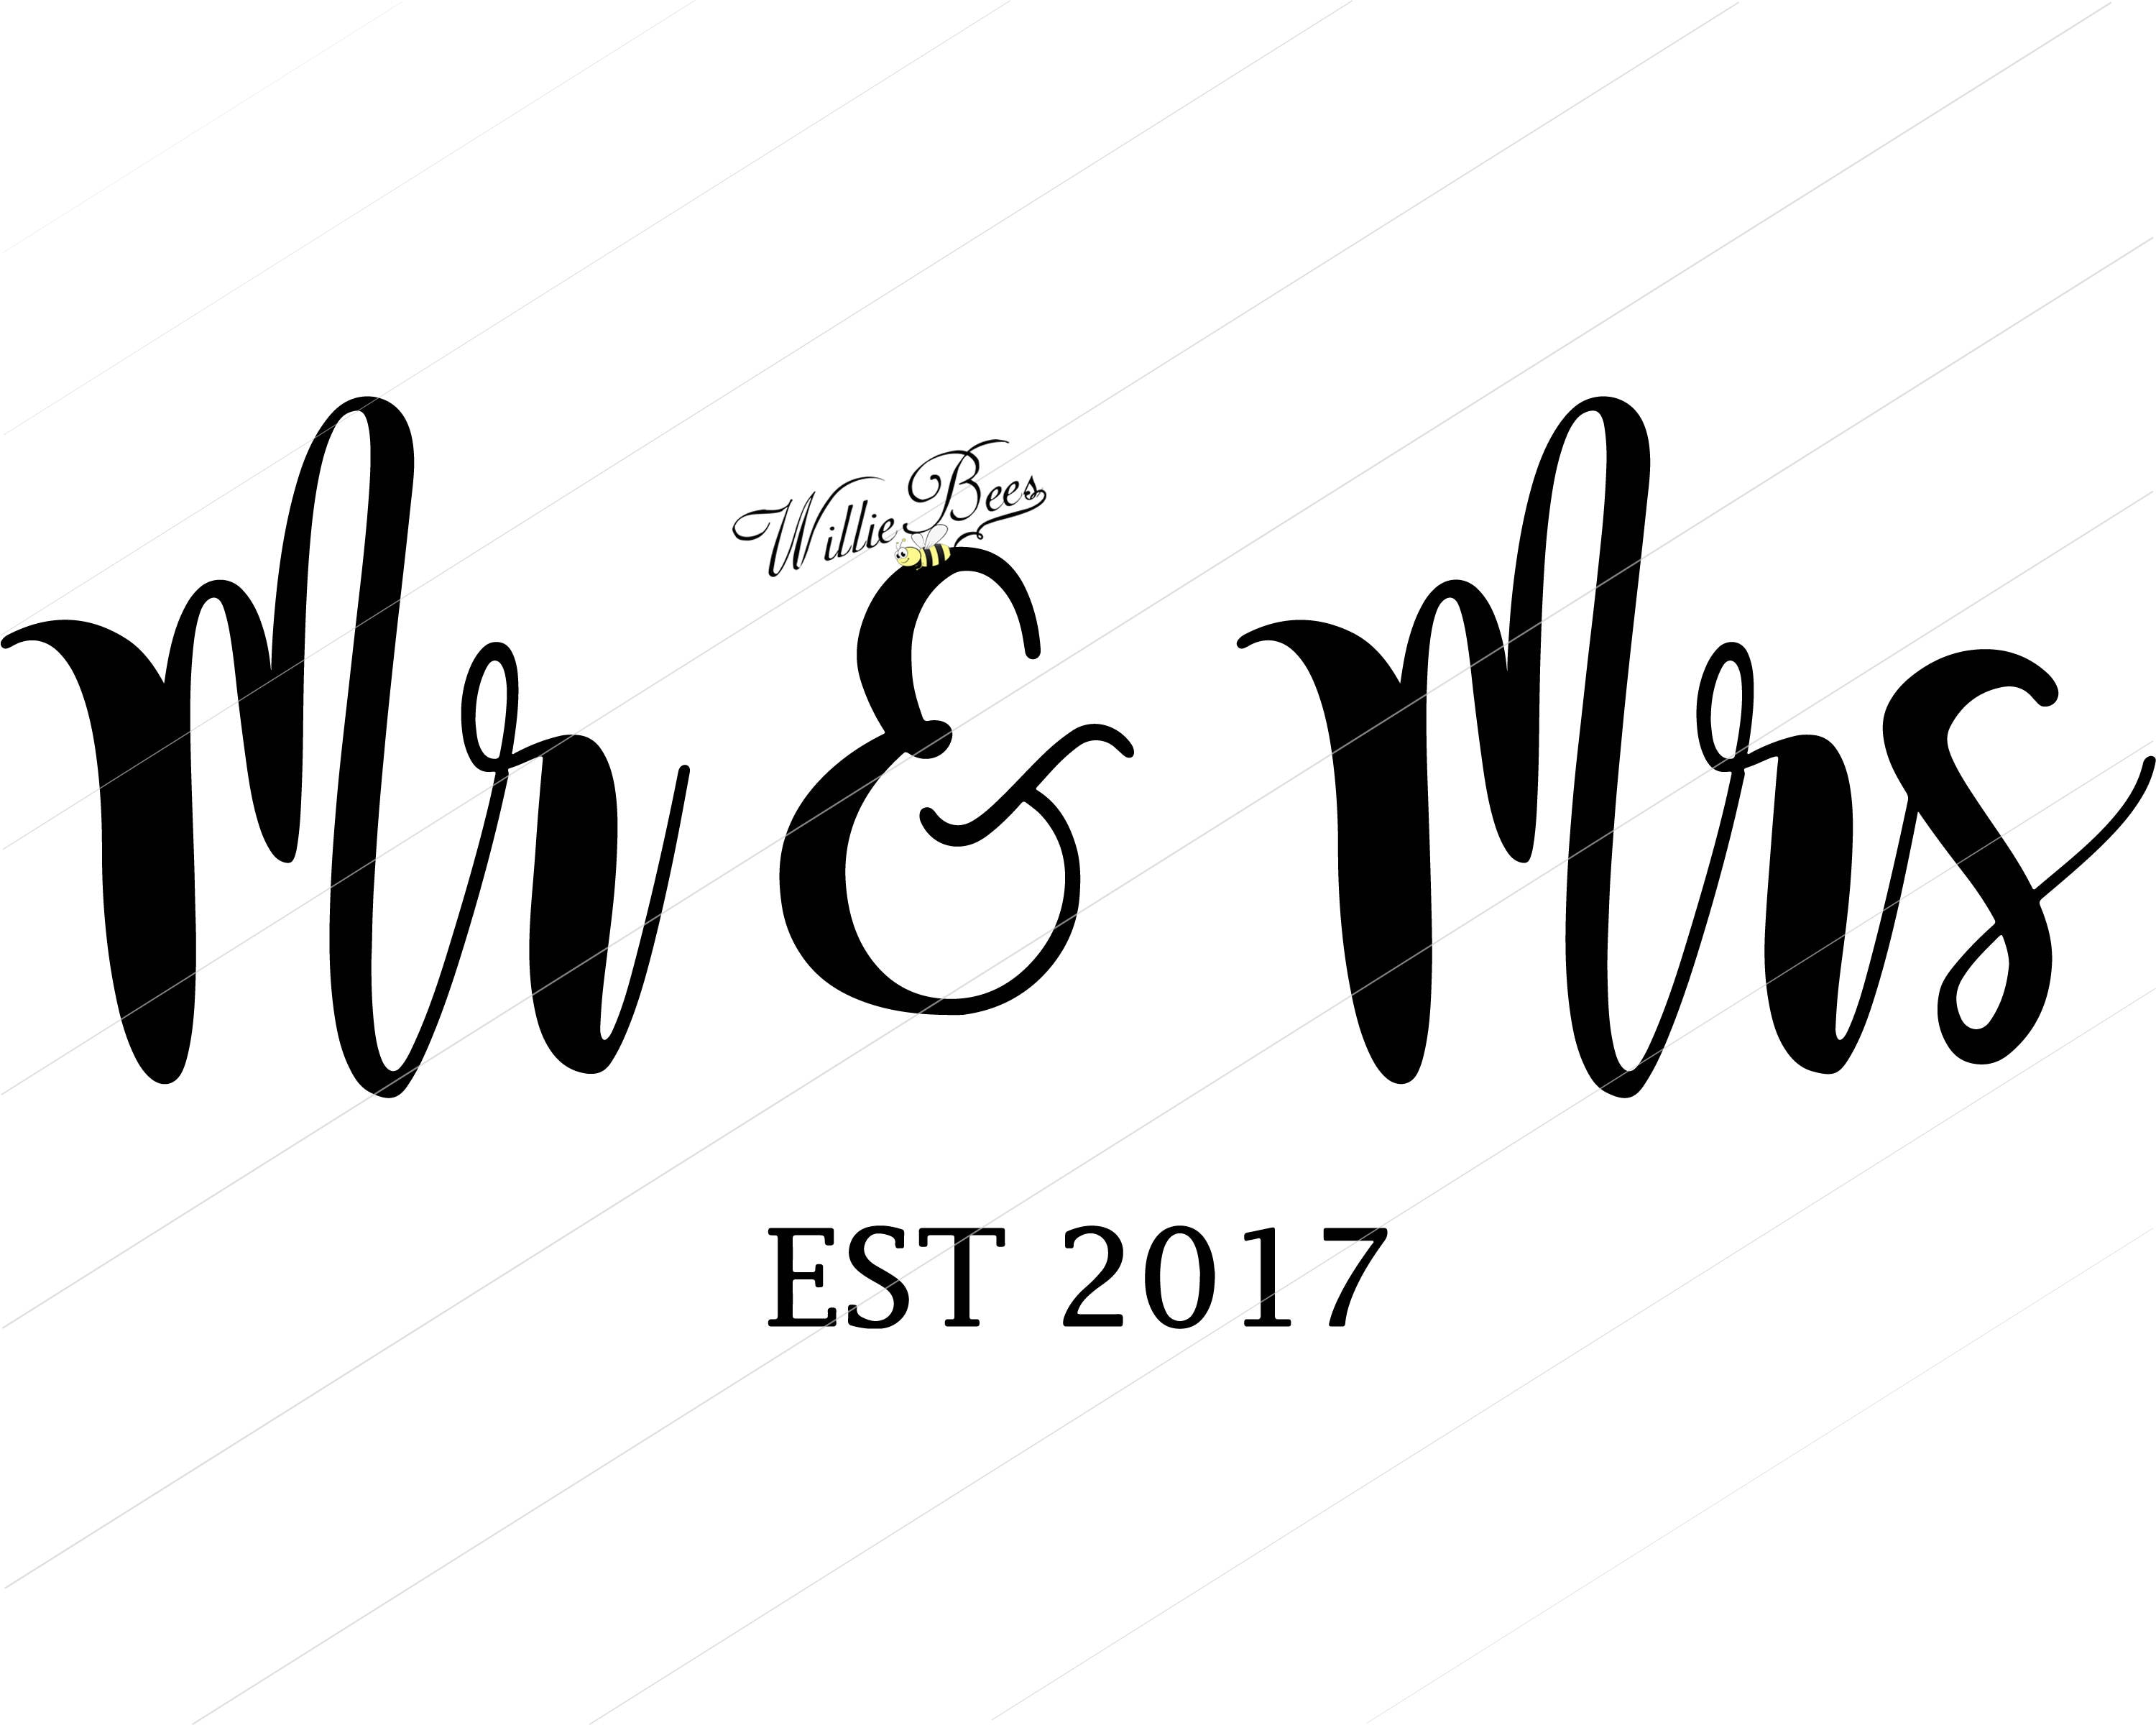 Mr And Mrs Est 2017, Overlay, Married Couple, Wedding Day ... for Silhouett...